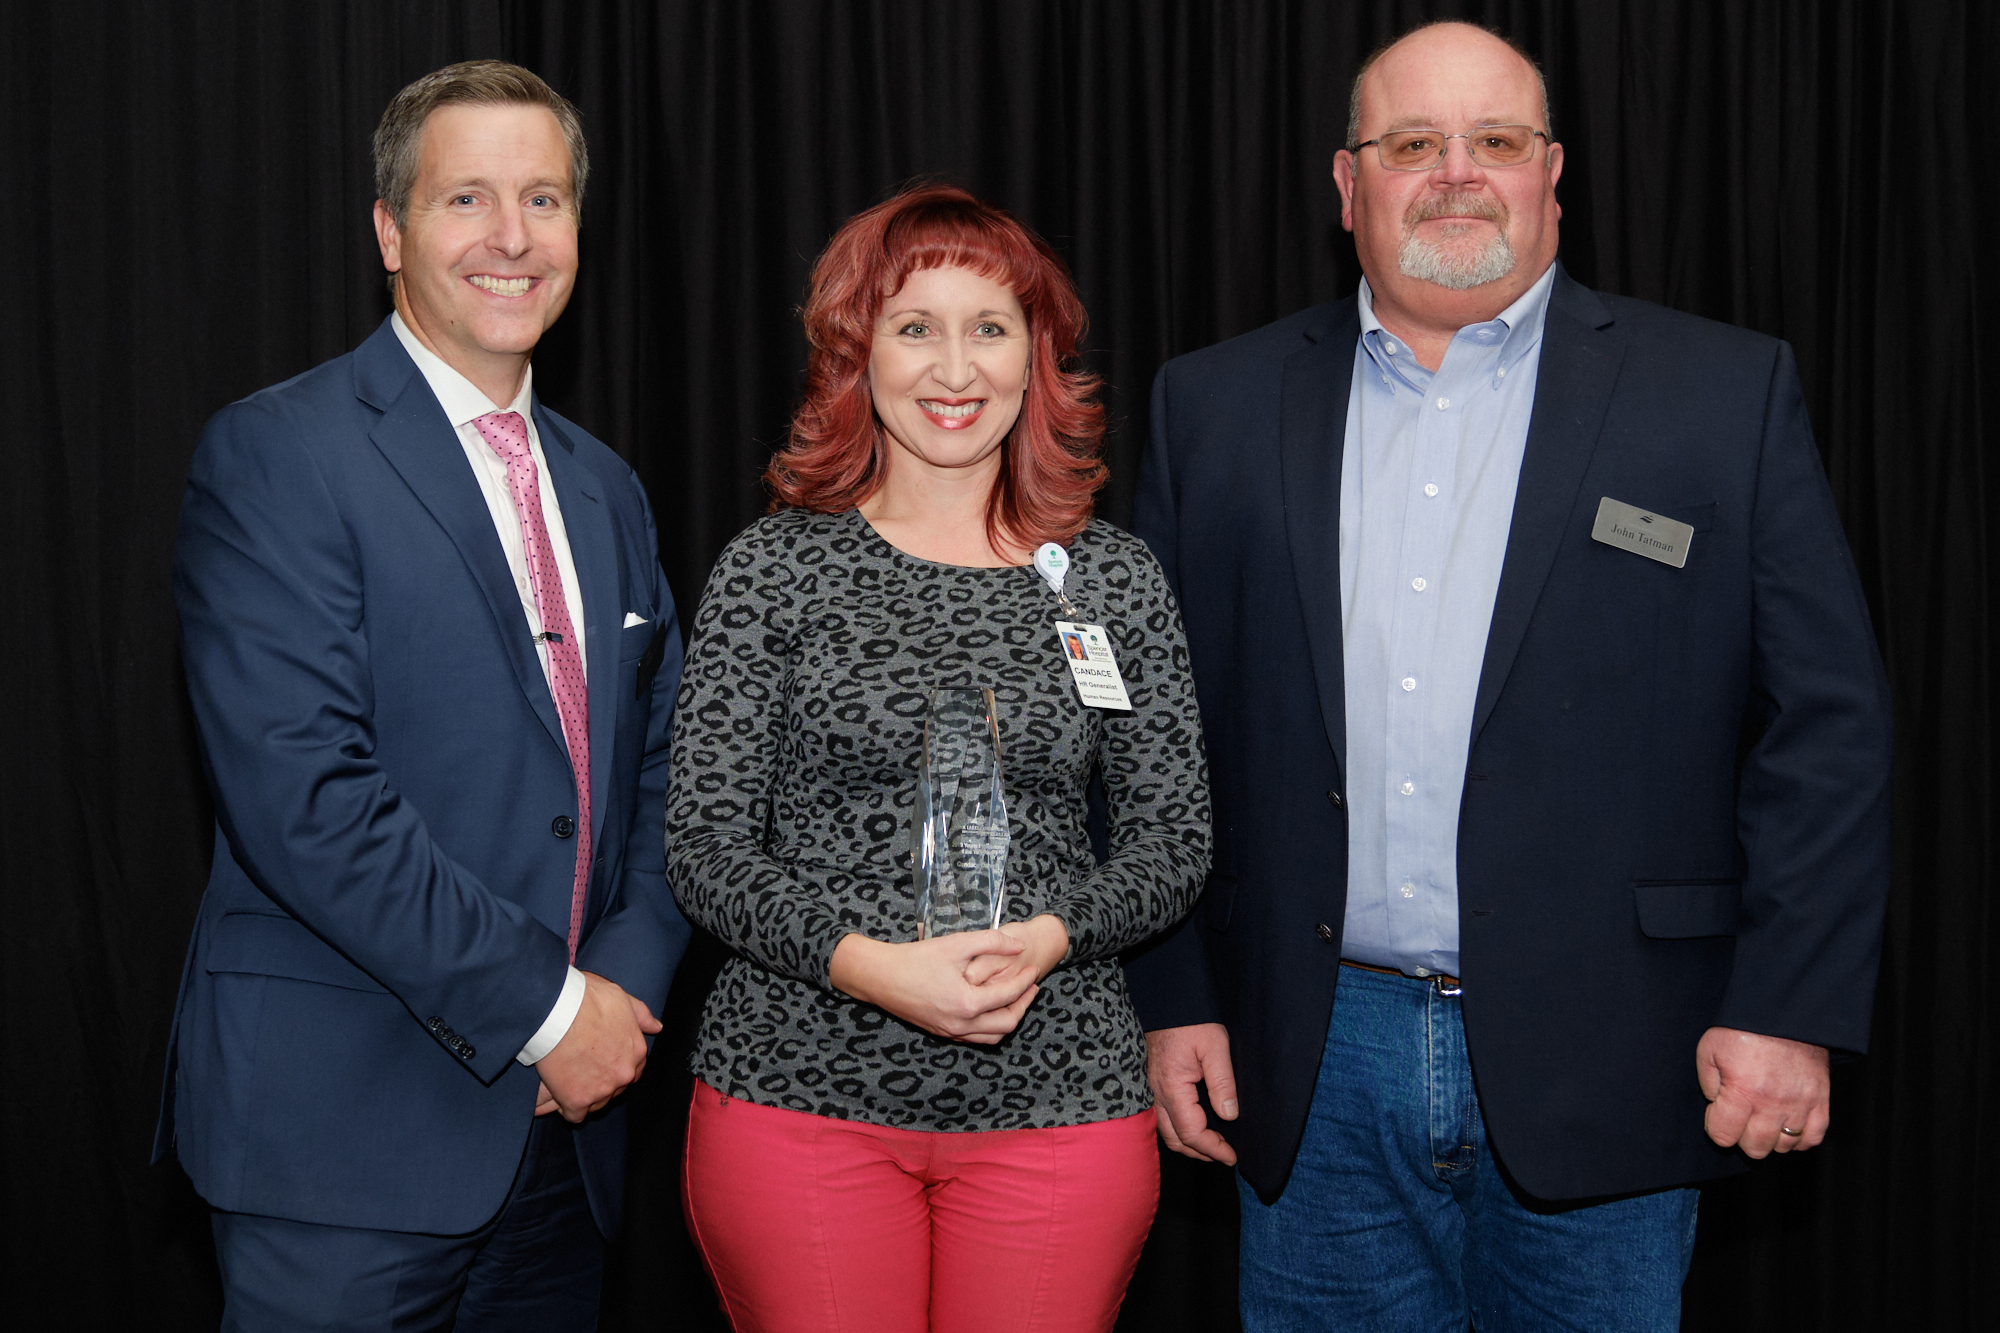 L to R: Corridor CEO Kiley Miller, 2019 Young Professional of the Year Candace Daniels (Spencer Hospital), Corridor Board Chair John Tatman